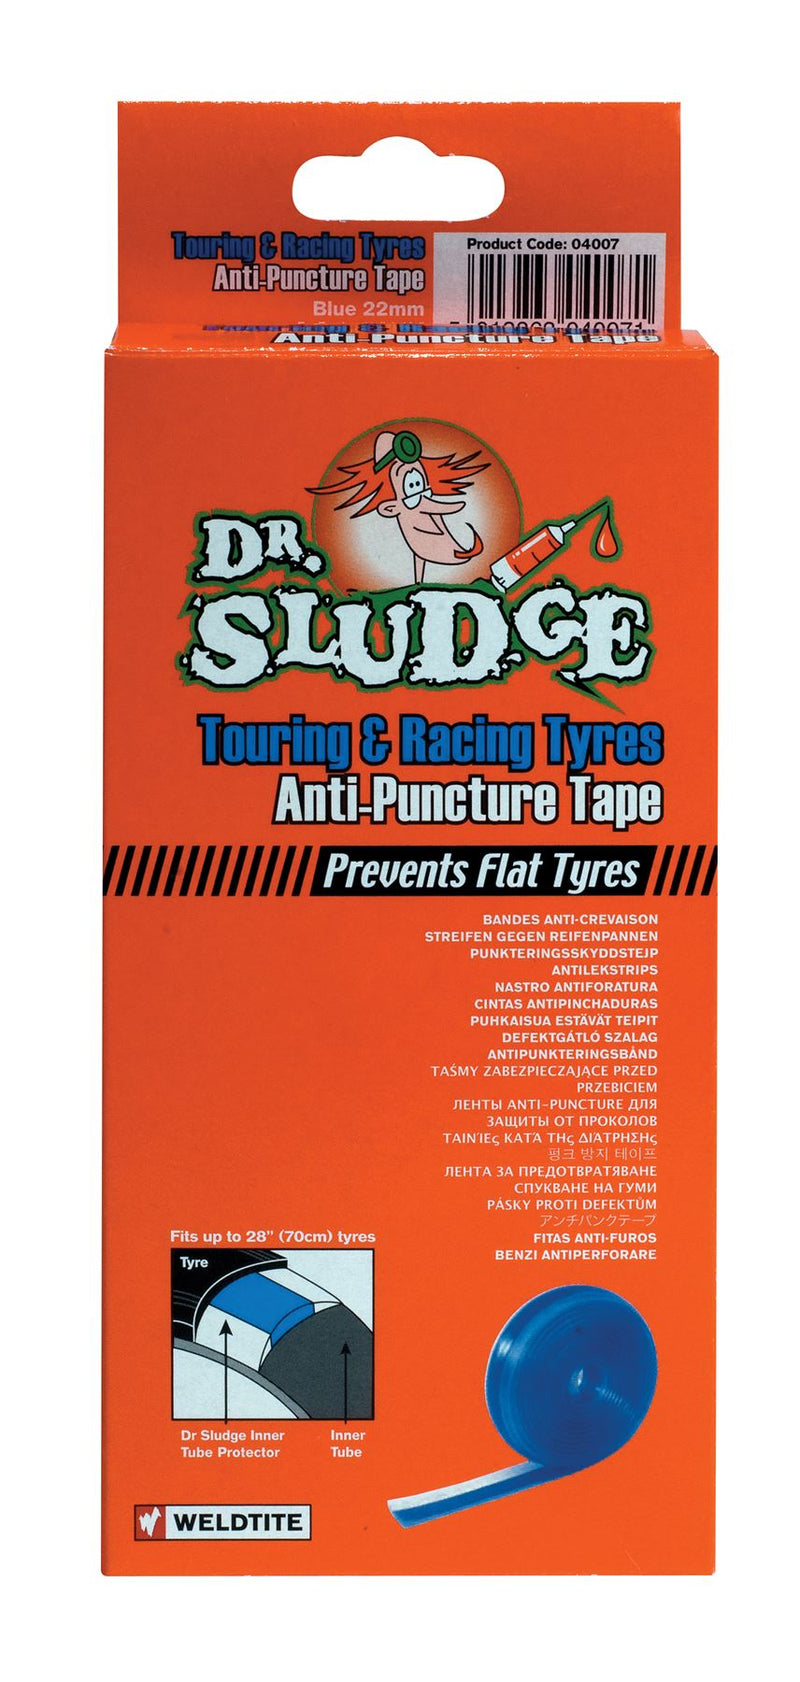 Dr Sludge 4007 Puncture Protection Tape (Touring & Racing) [Blue]